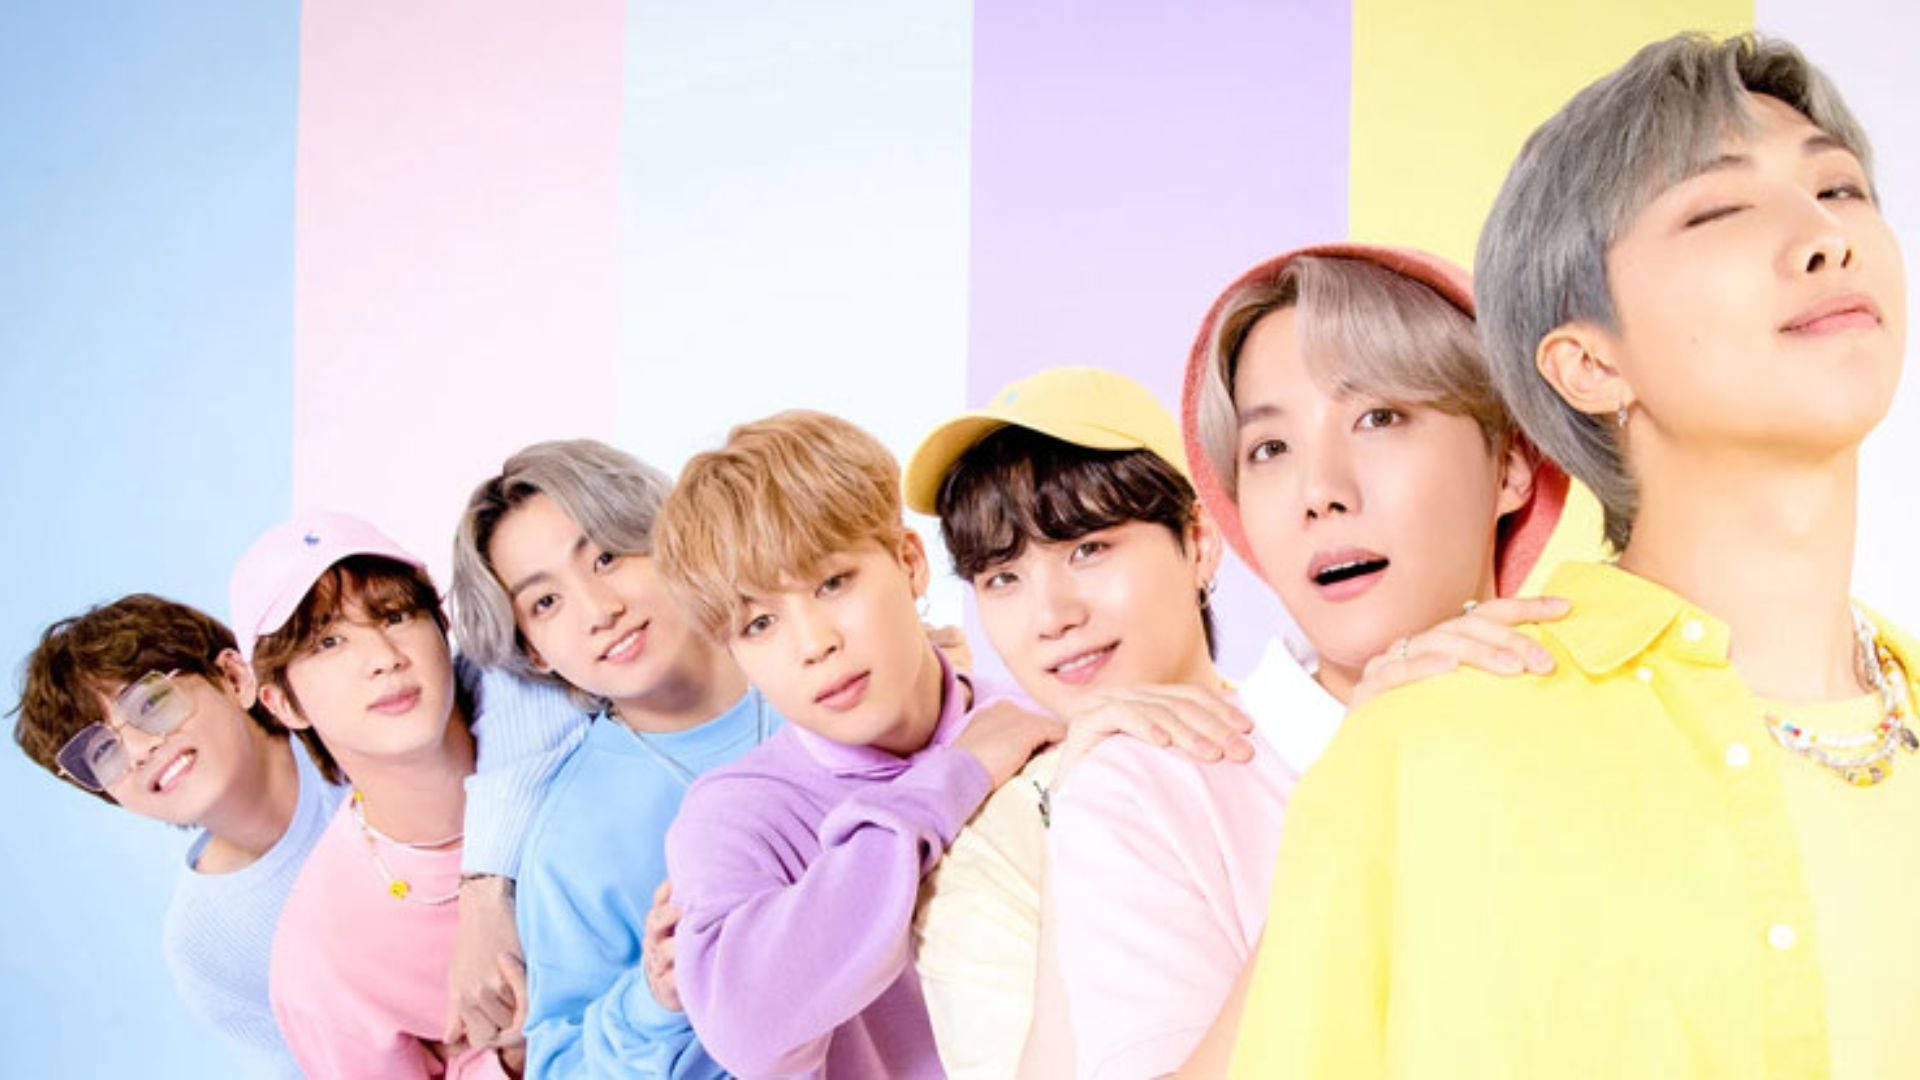 Pastel Outfit And Background Bts Cute Aesthetic Background